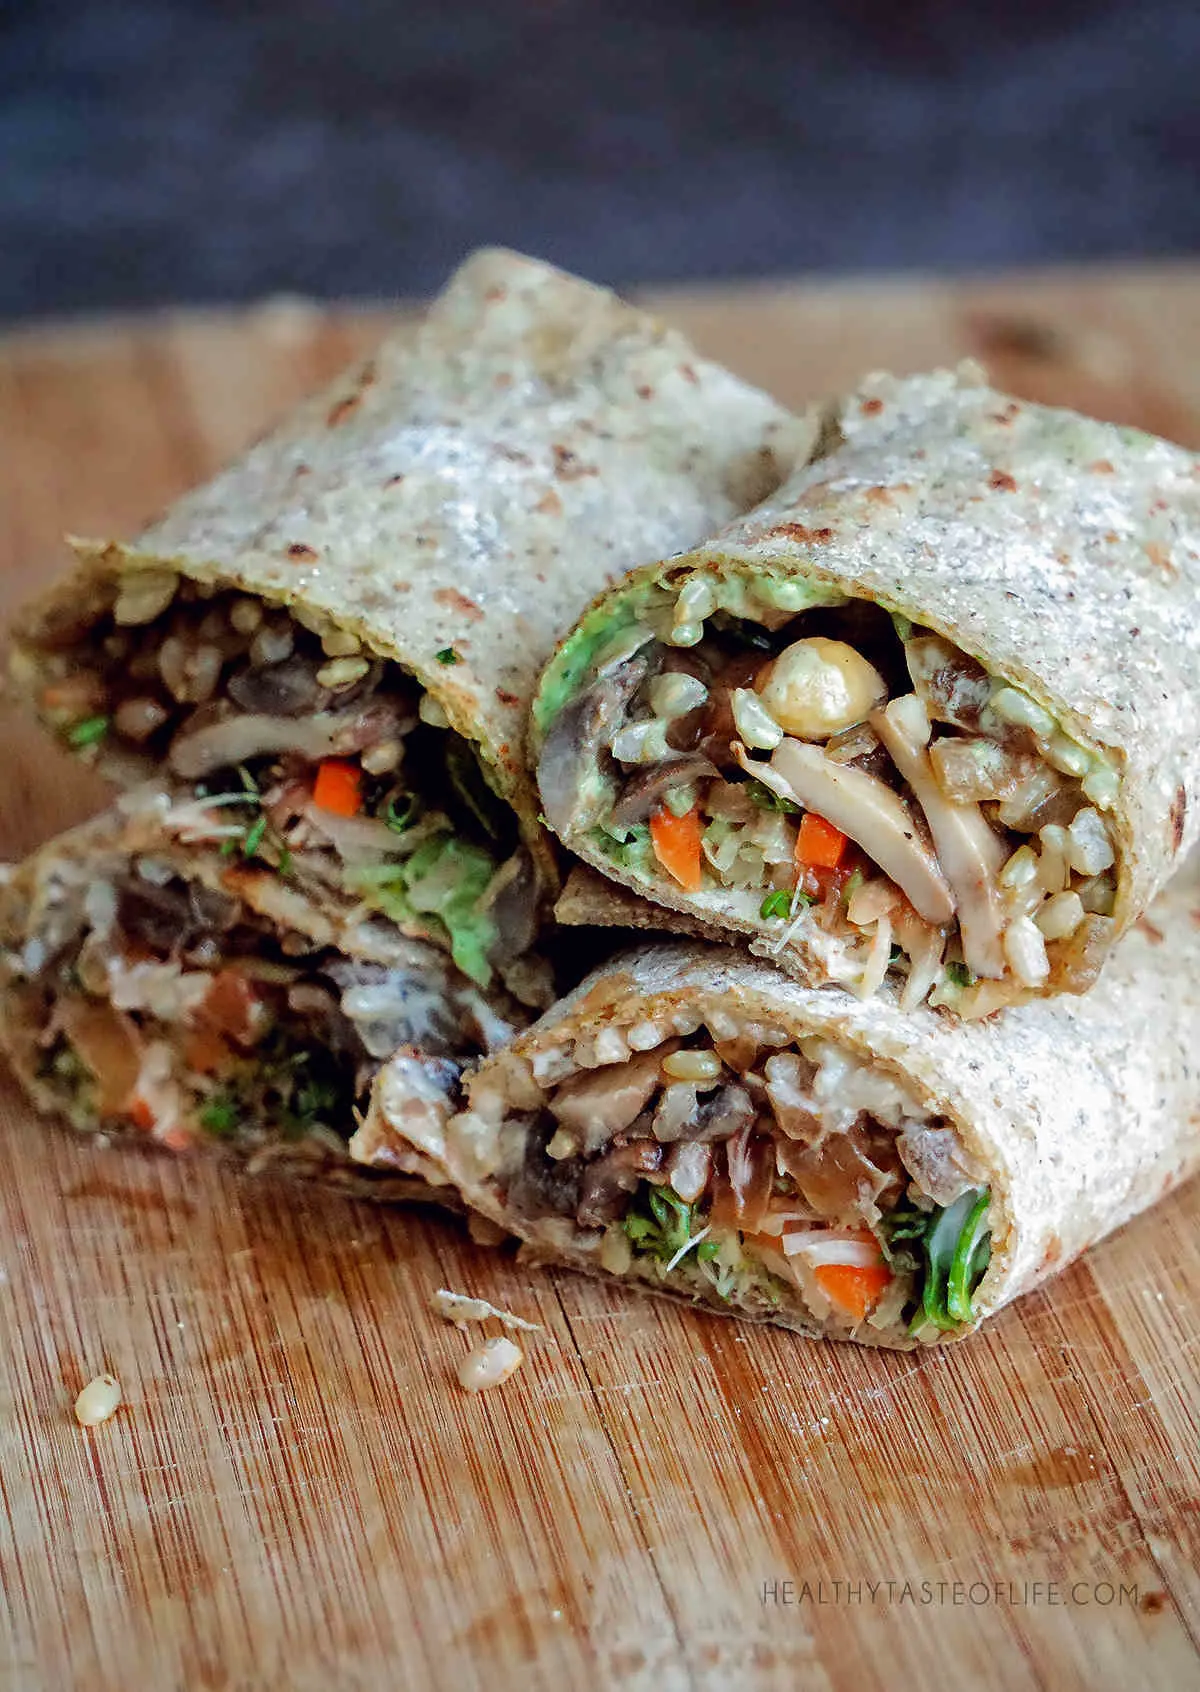 Savory breakfast burrito made with homemade gluten free tortillas filled with cooked mushrooms, rice, chickpeas, sauerkraut, greens and an avocado sauce.